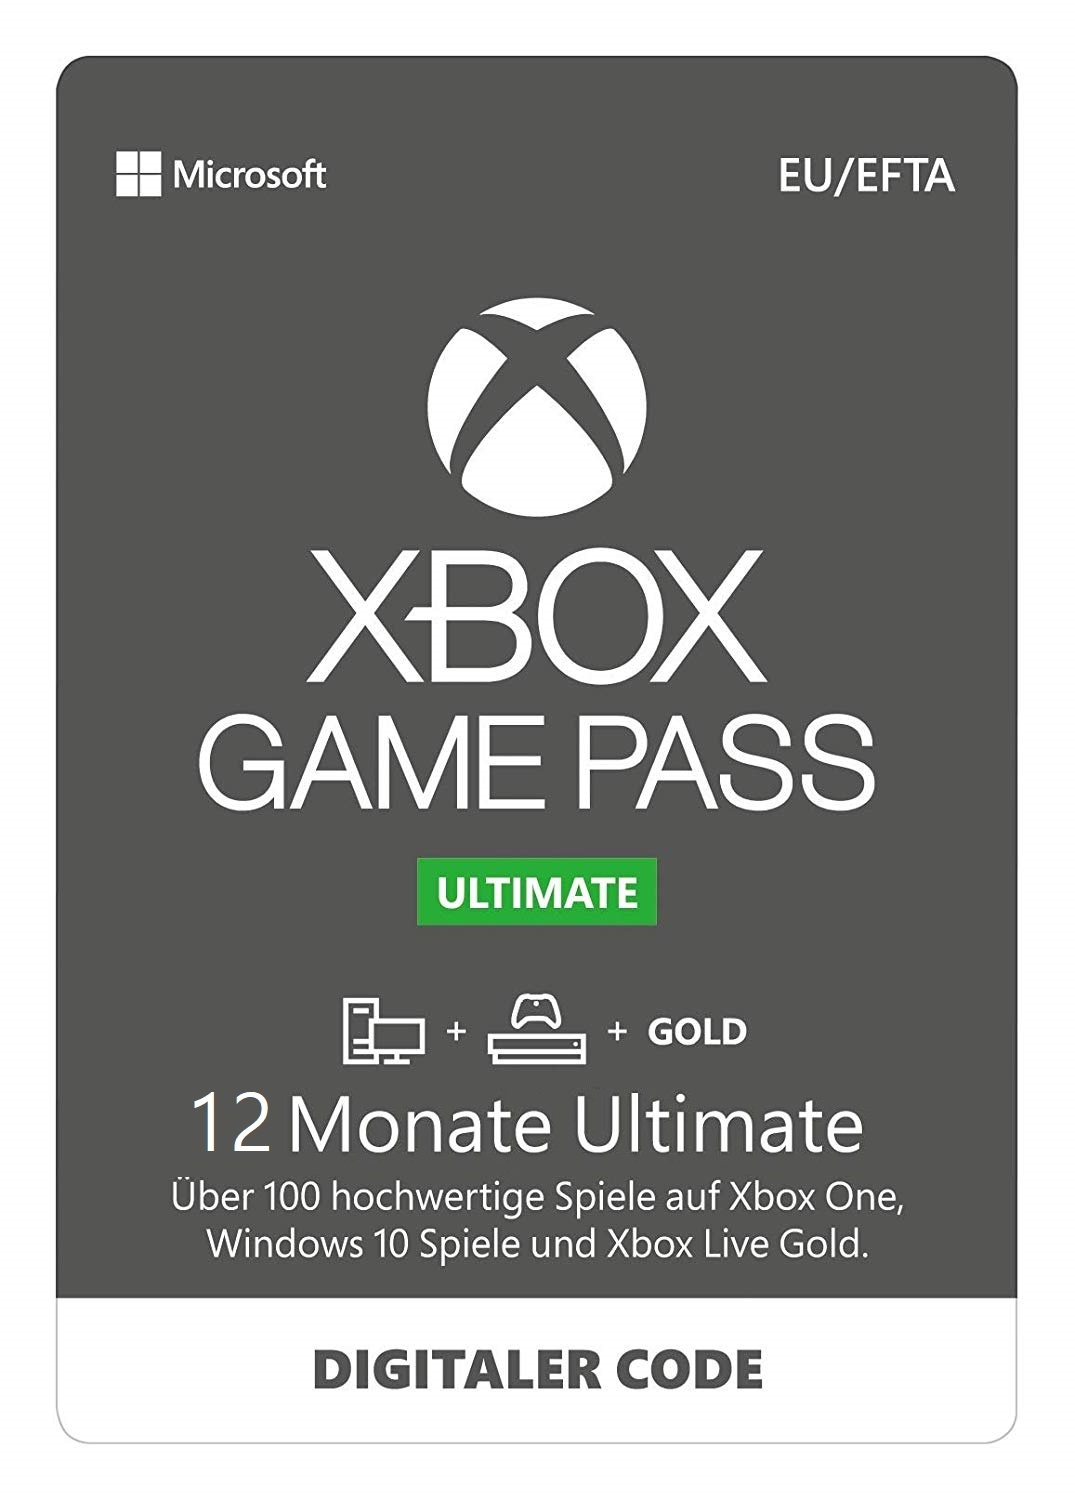 xbox game pass ultimate 3 months